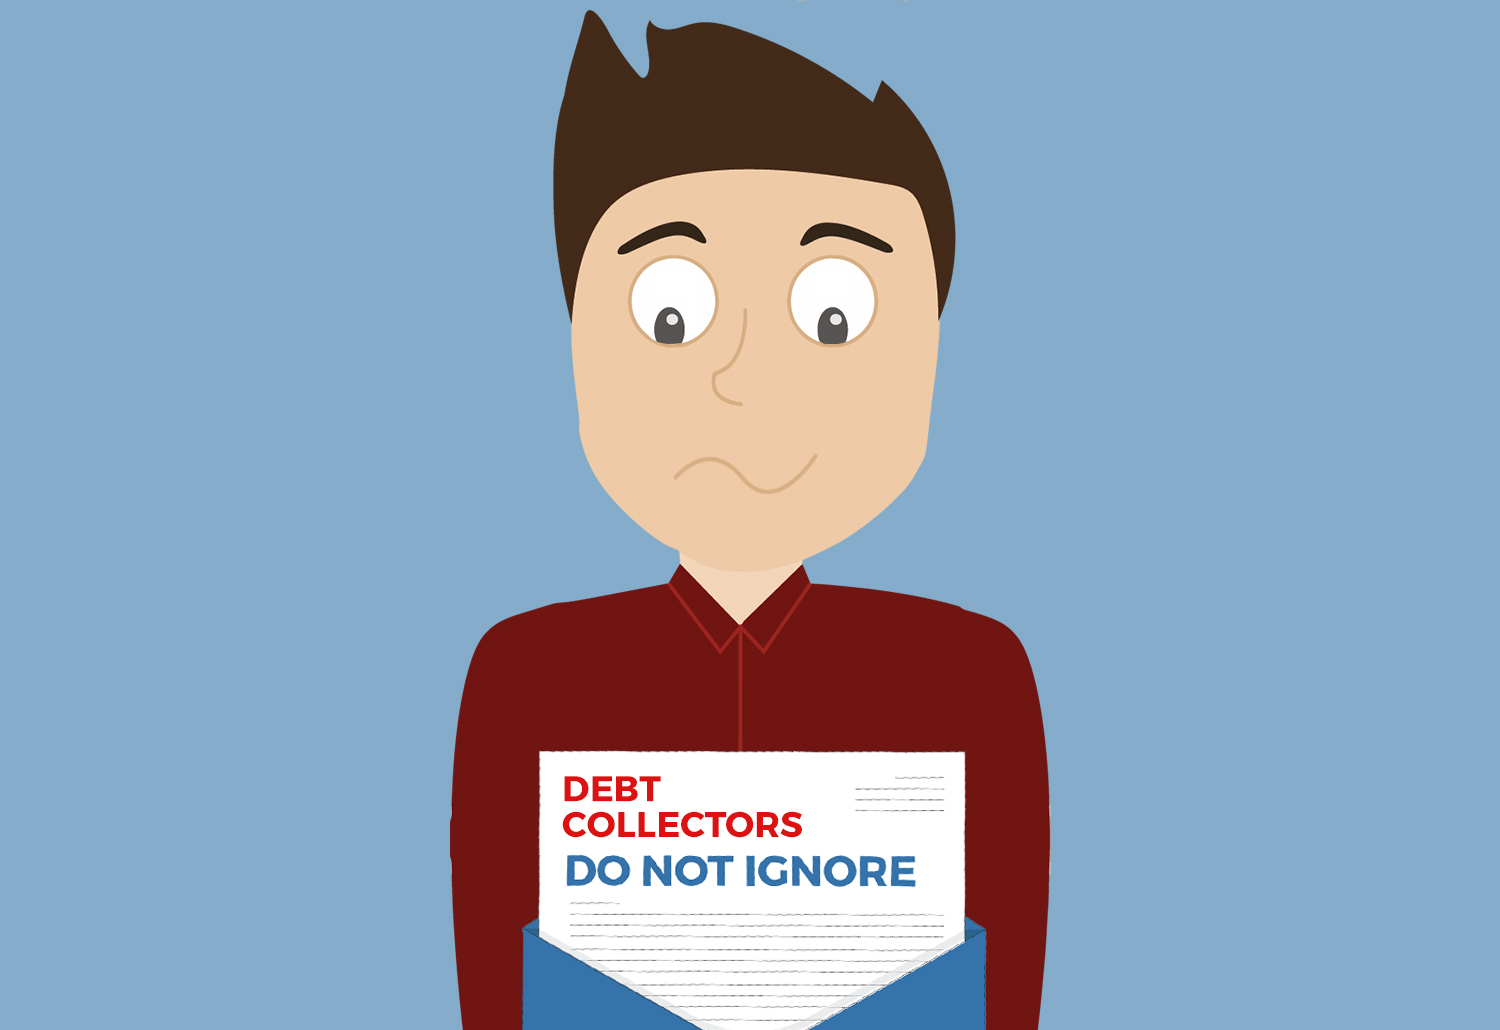 My Debts have been sold to a debt collector – What should I do?